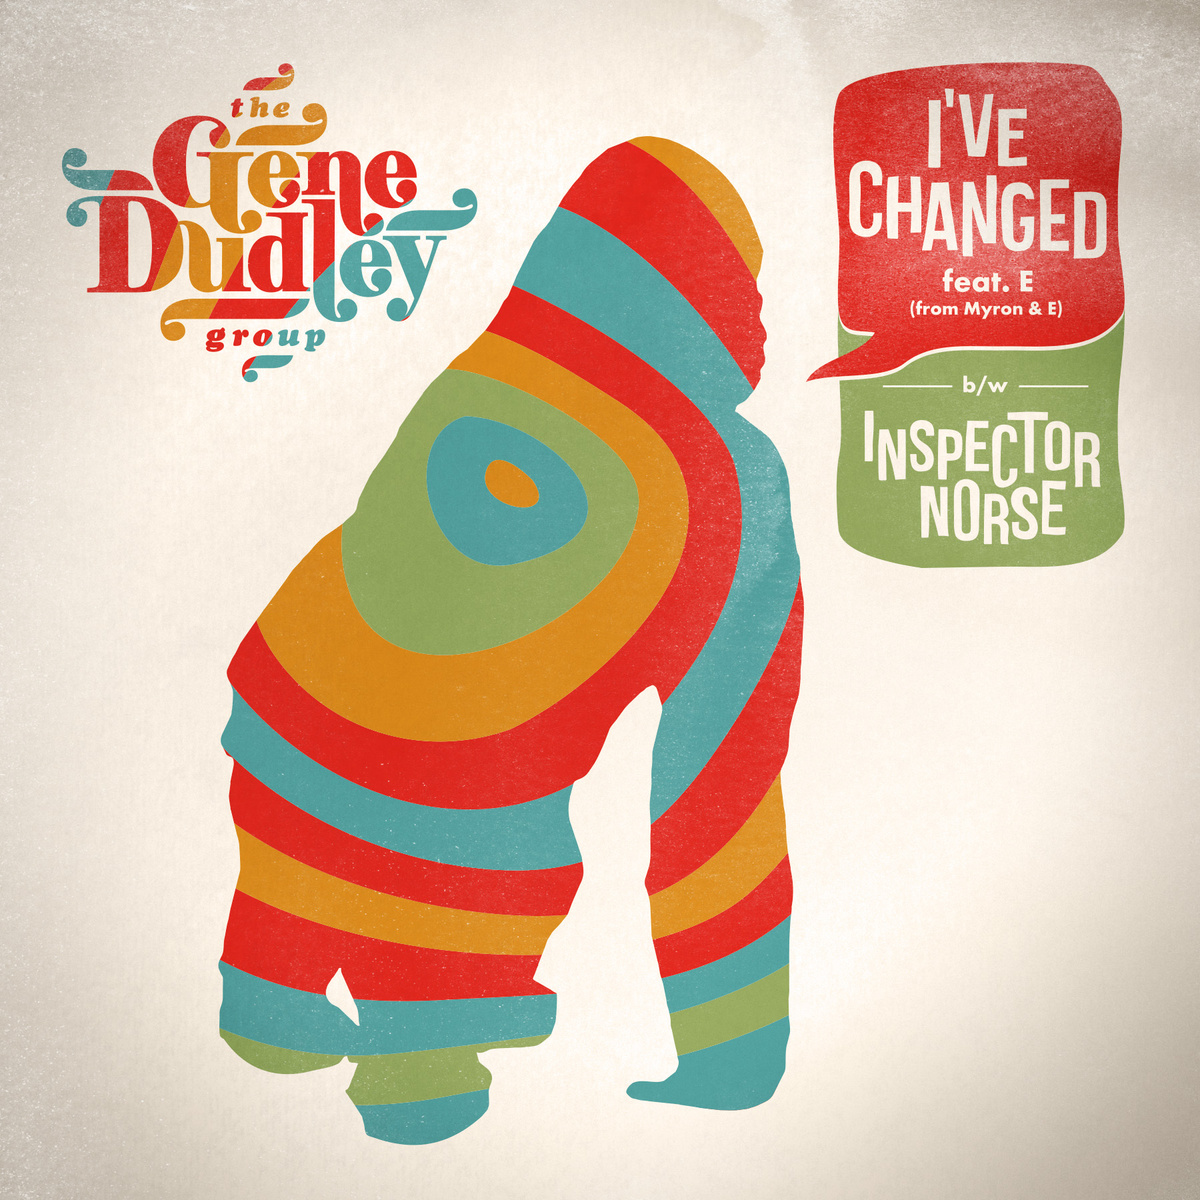 Listen: The Gene Dudley Group – I’ve Changed/Inspector Norse